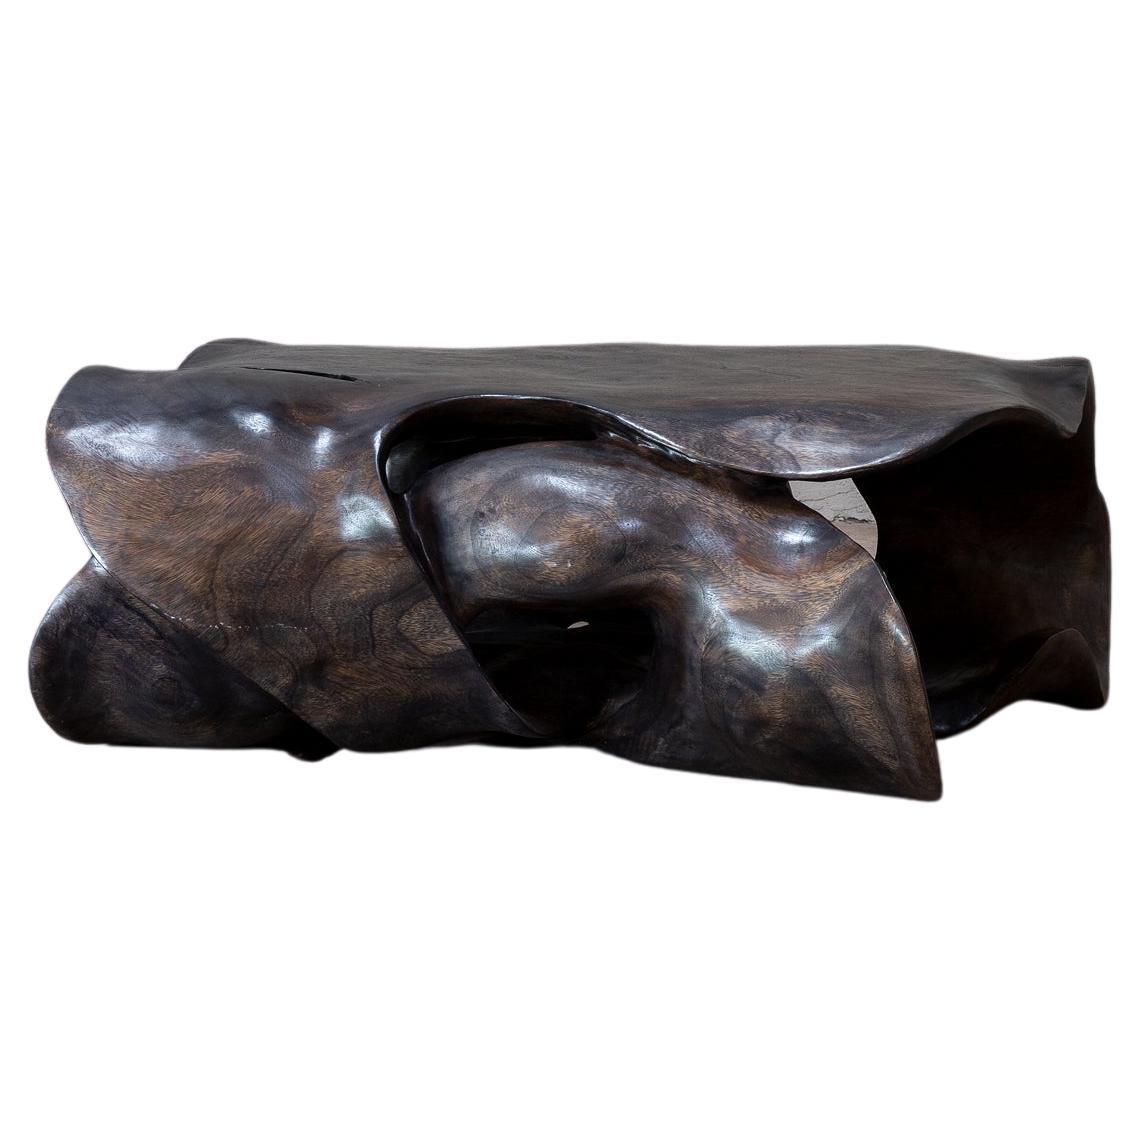 Nudo Sculpture Coffee Table by CEU Studio, Represented by Tuleste Factory For Sale